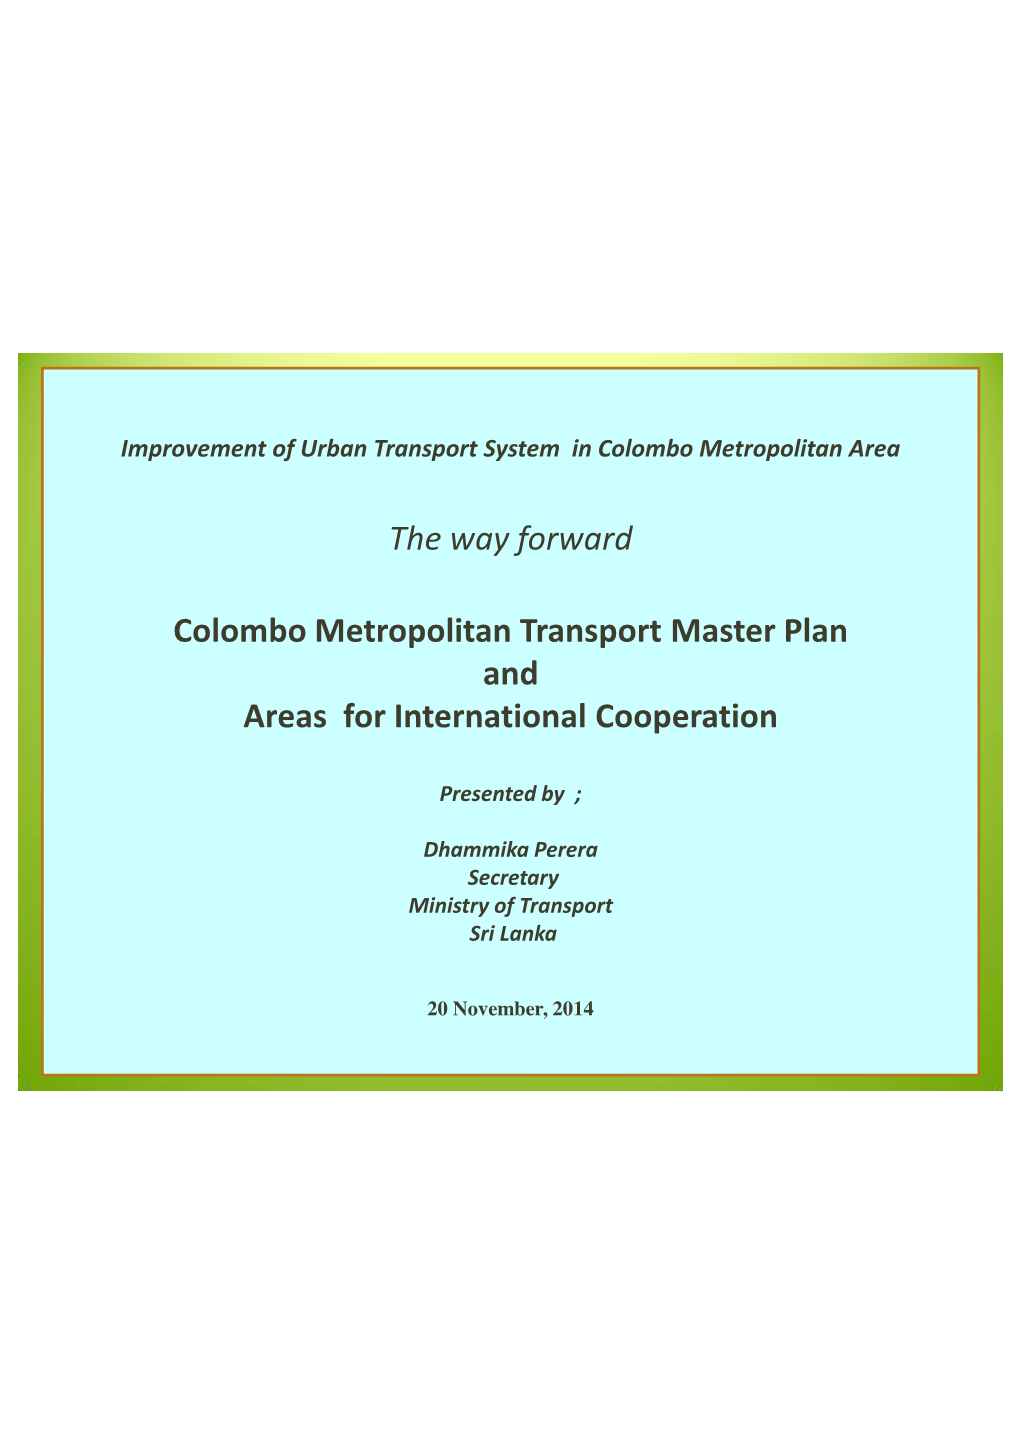 Colombo Metropolitan Transport Master Plan and Areas for International Cooperation